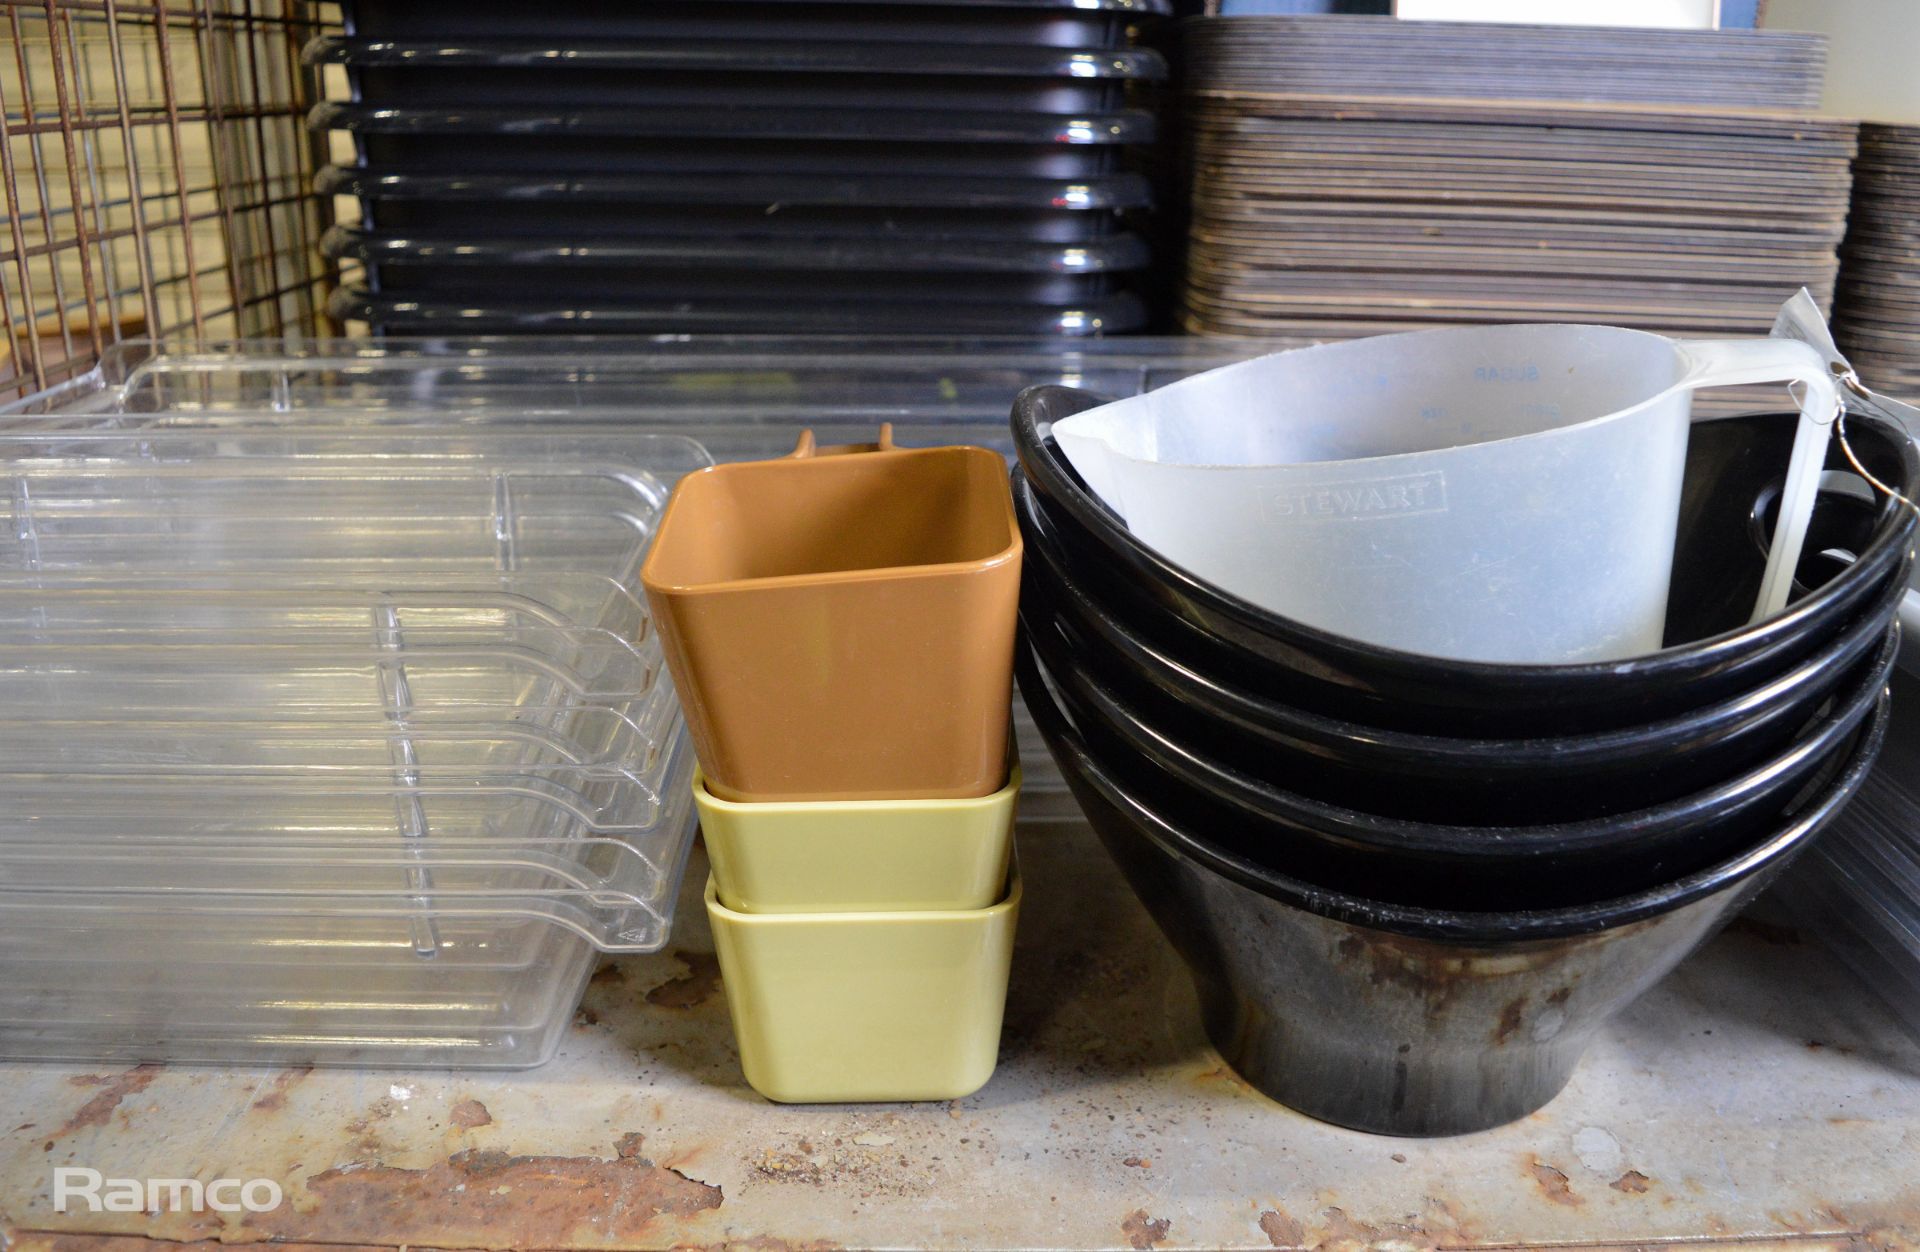 Plastic Catering Equipment - Trays, Bowls, Containers, cutlery trays - Image 4 of 4